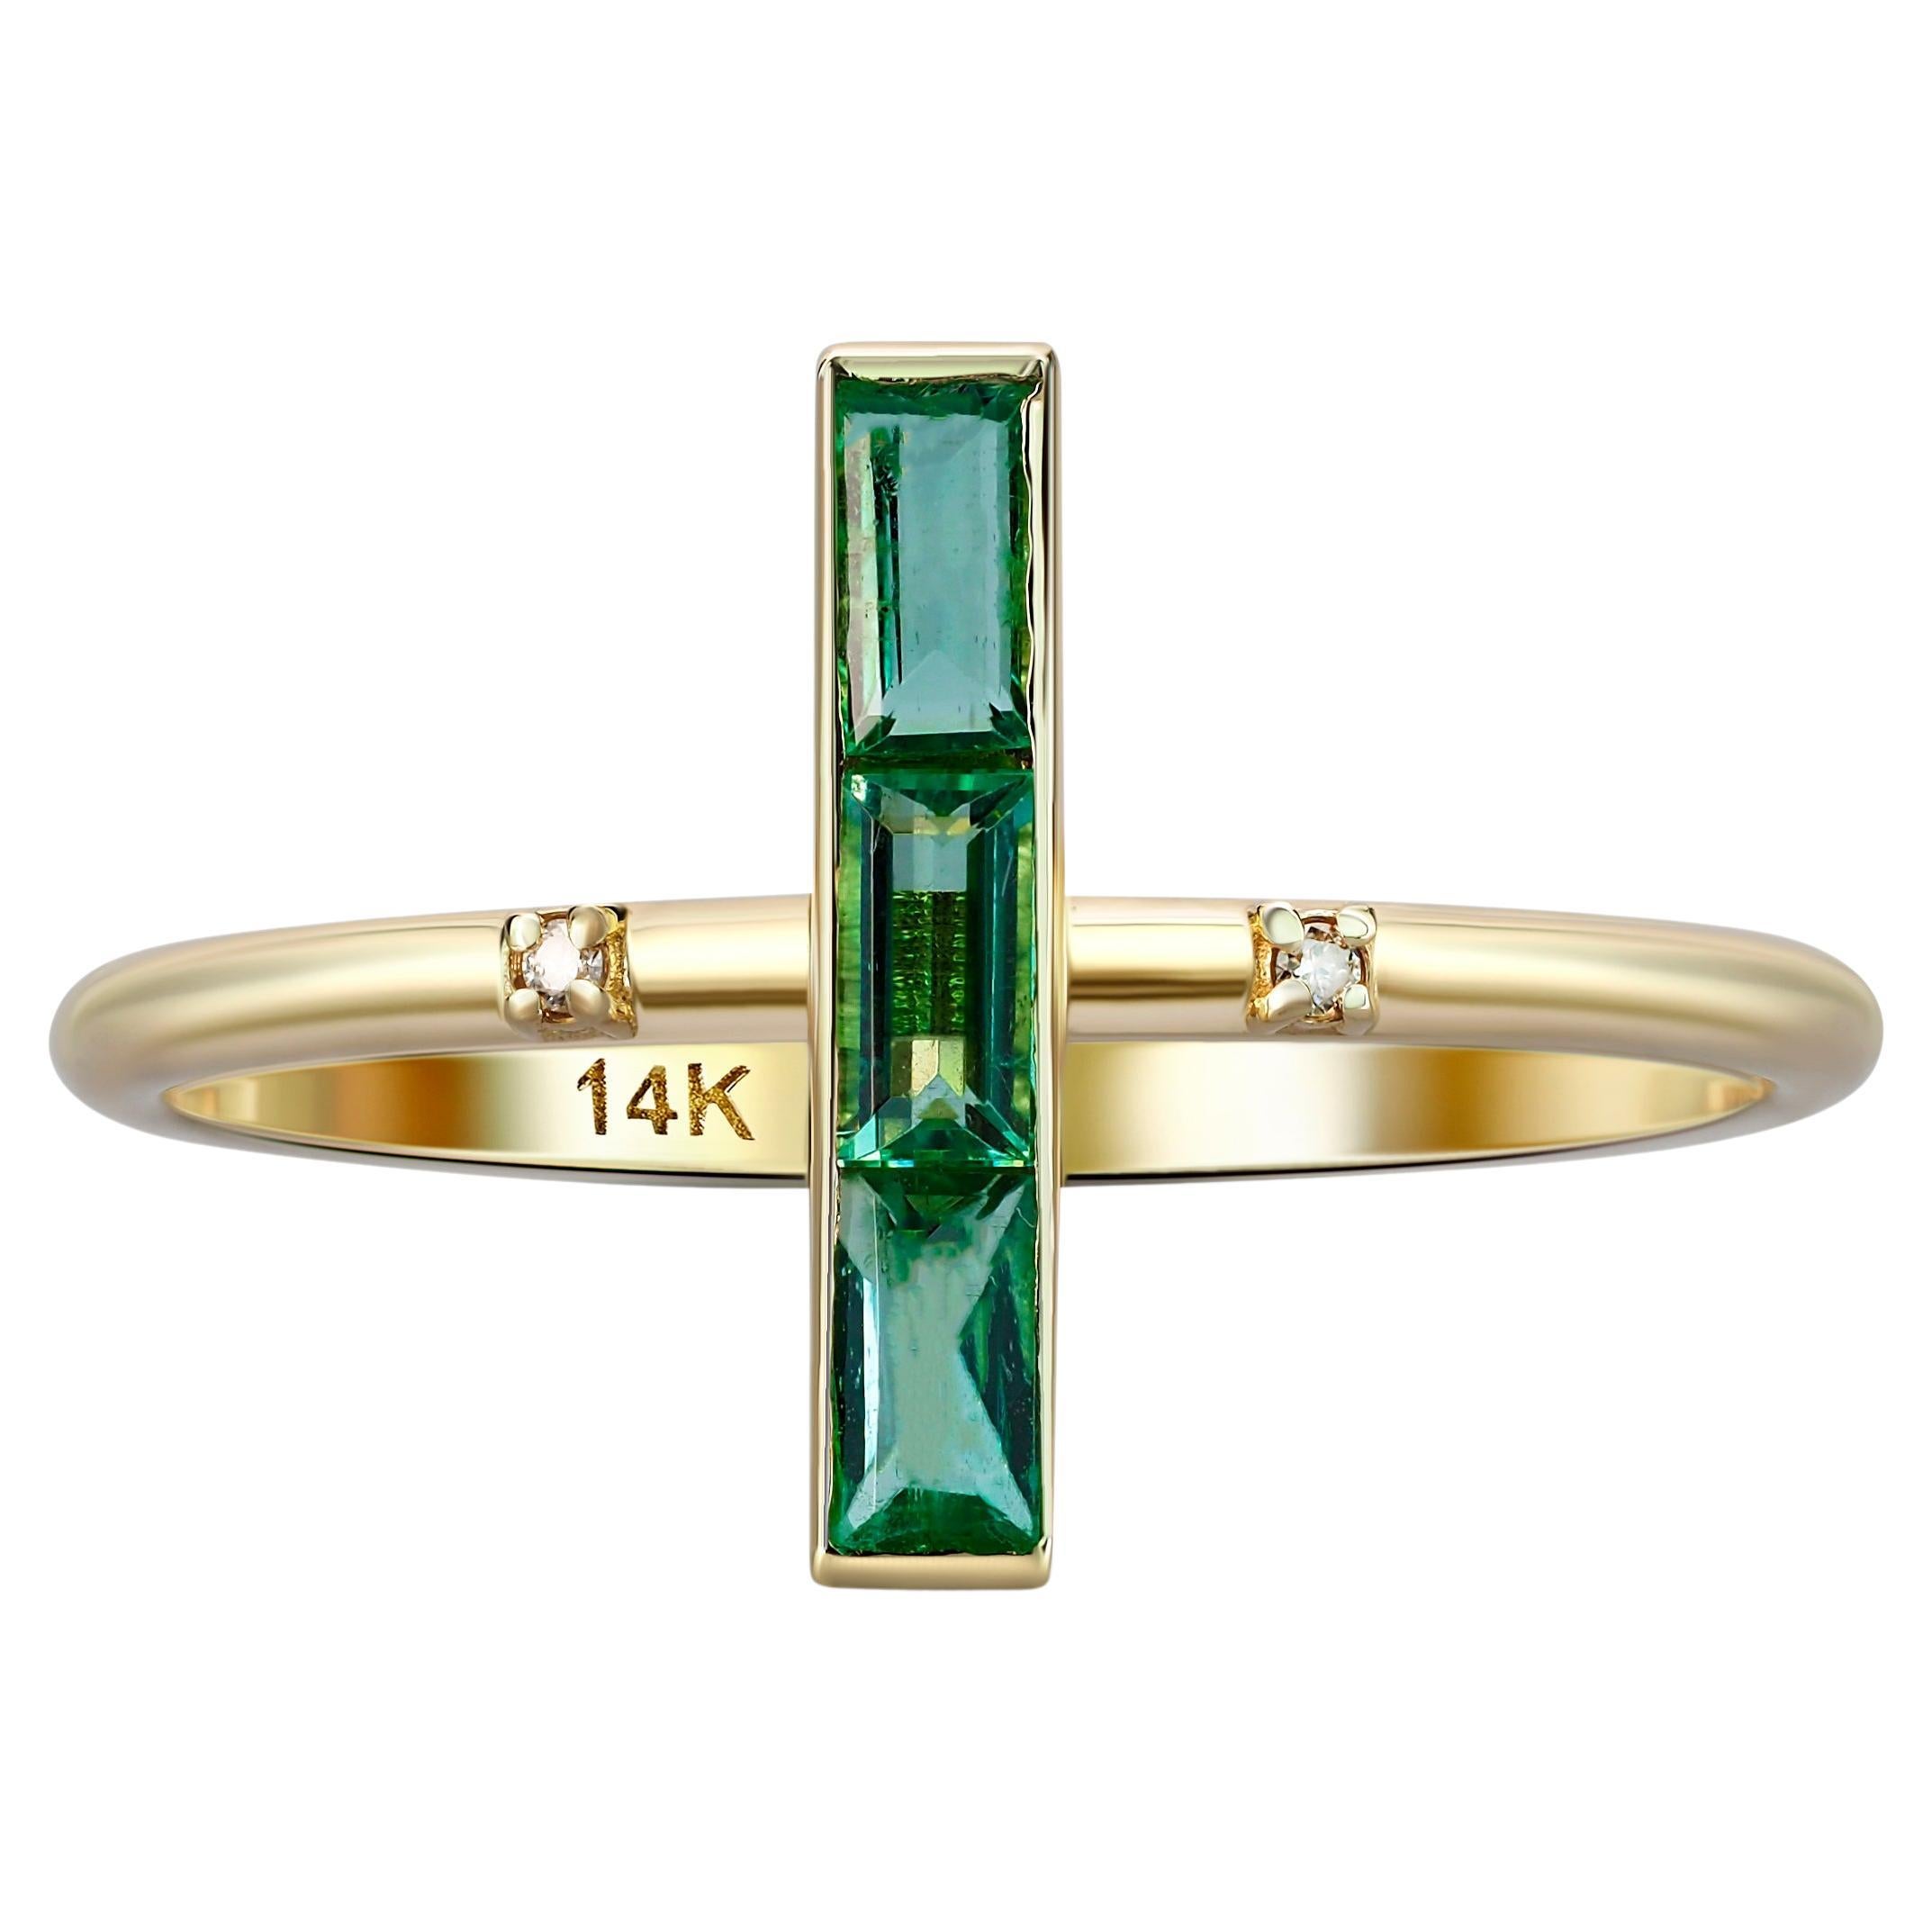 14k gold ring with natural Emeralds. 